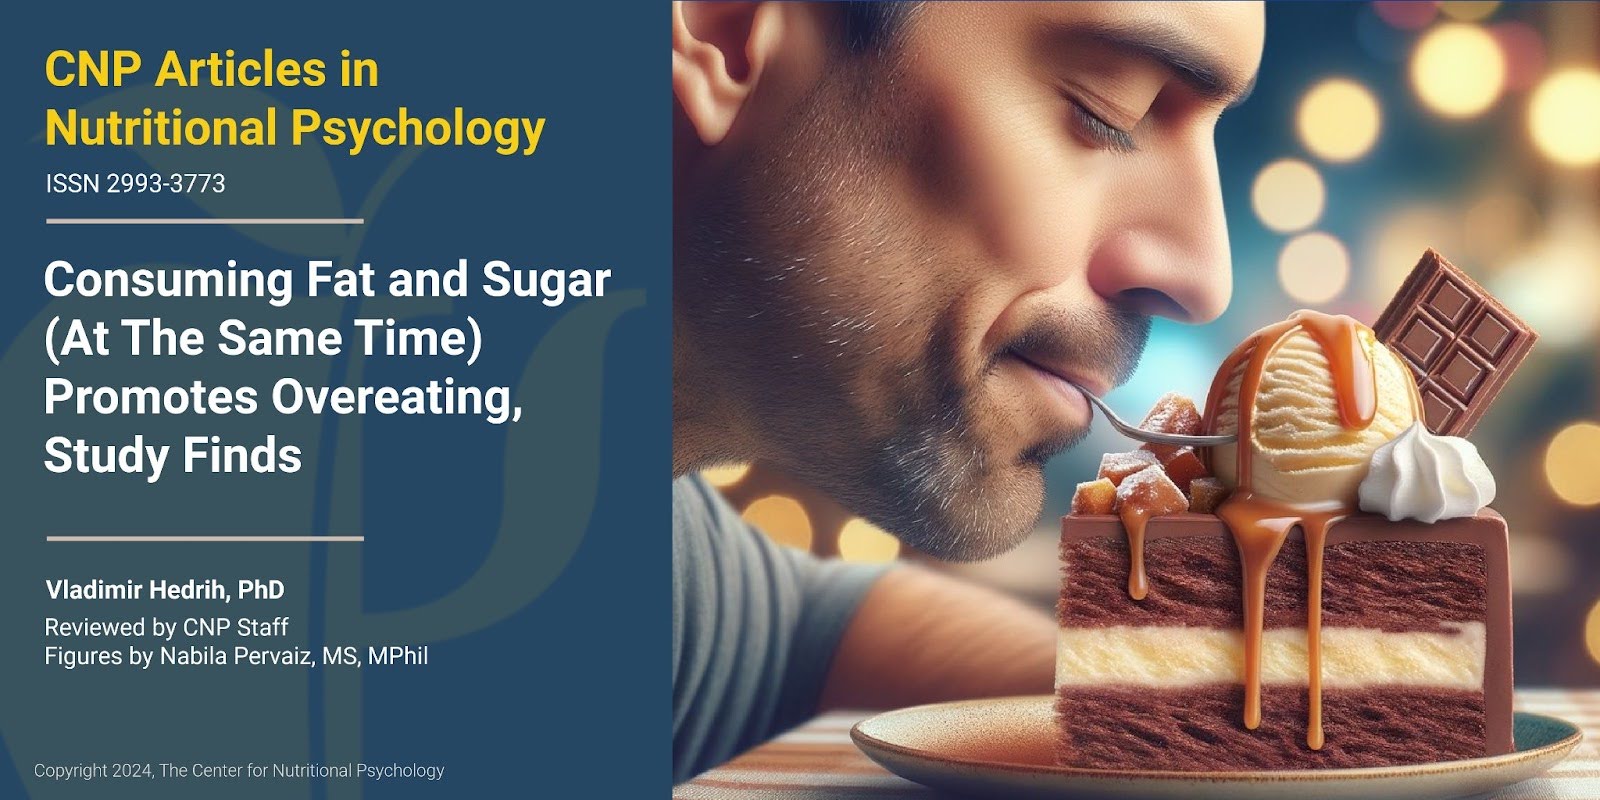 Consuming Fat and Sugar Promotes Overeating, Study Finds